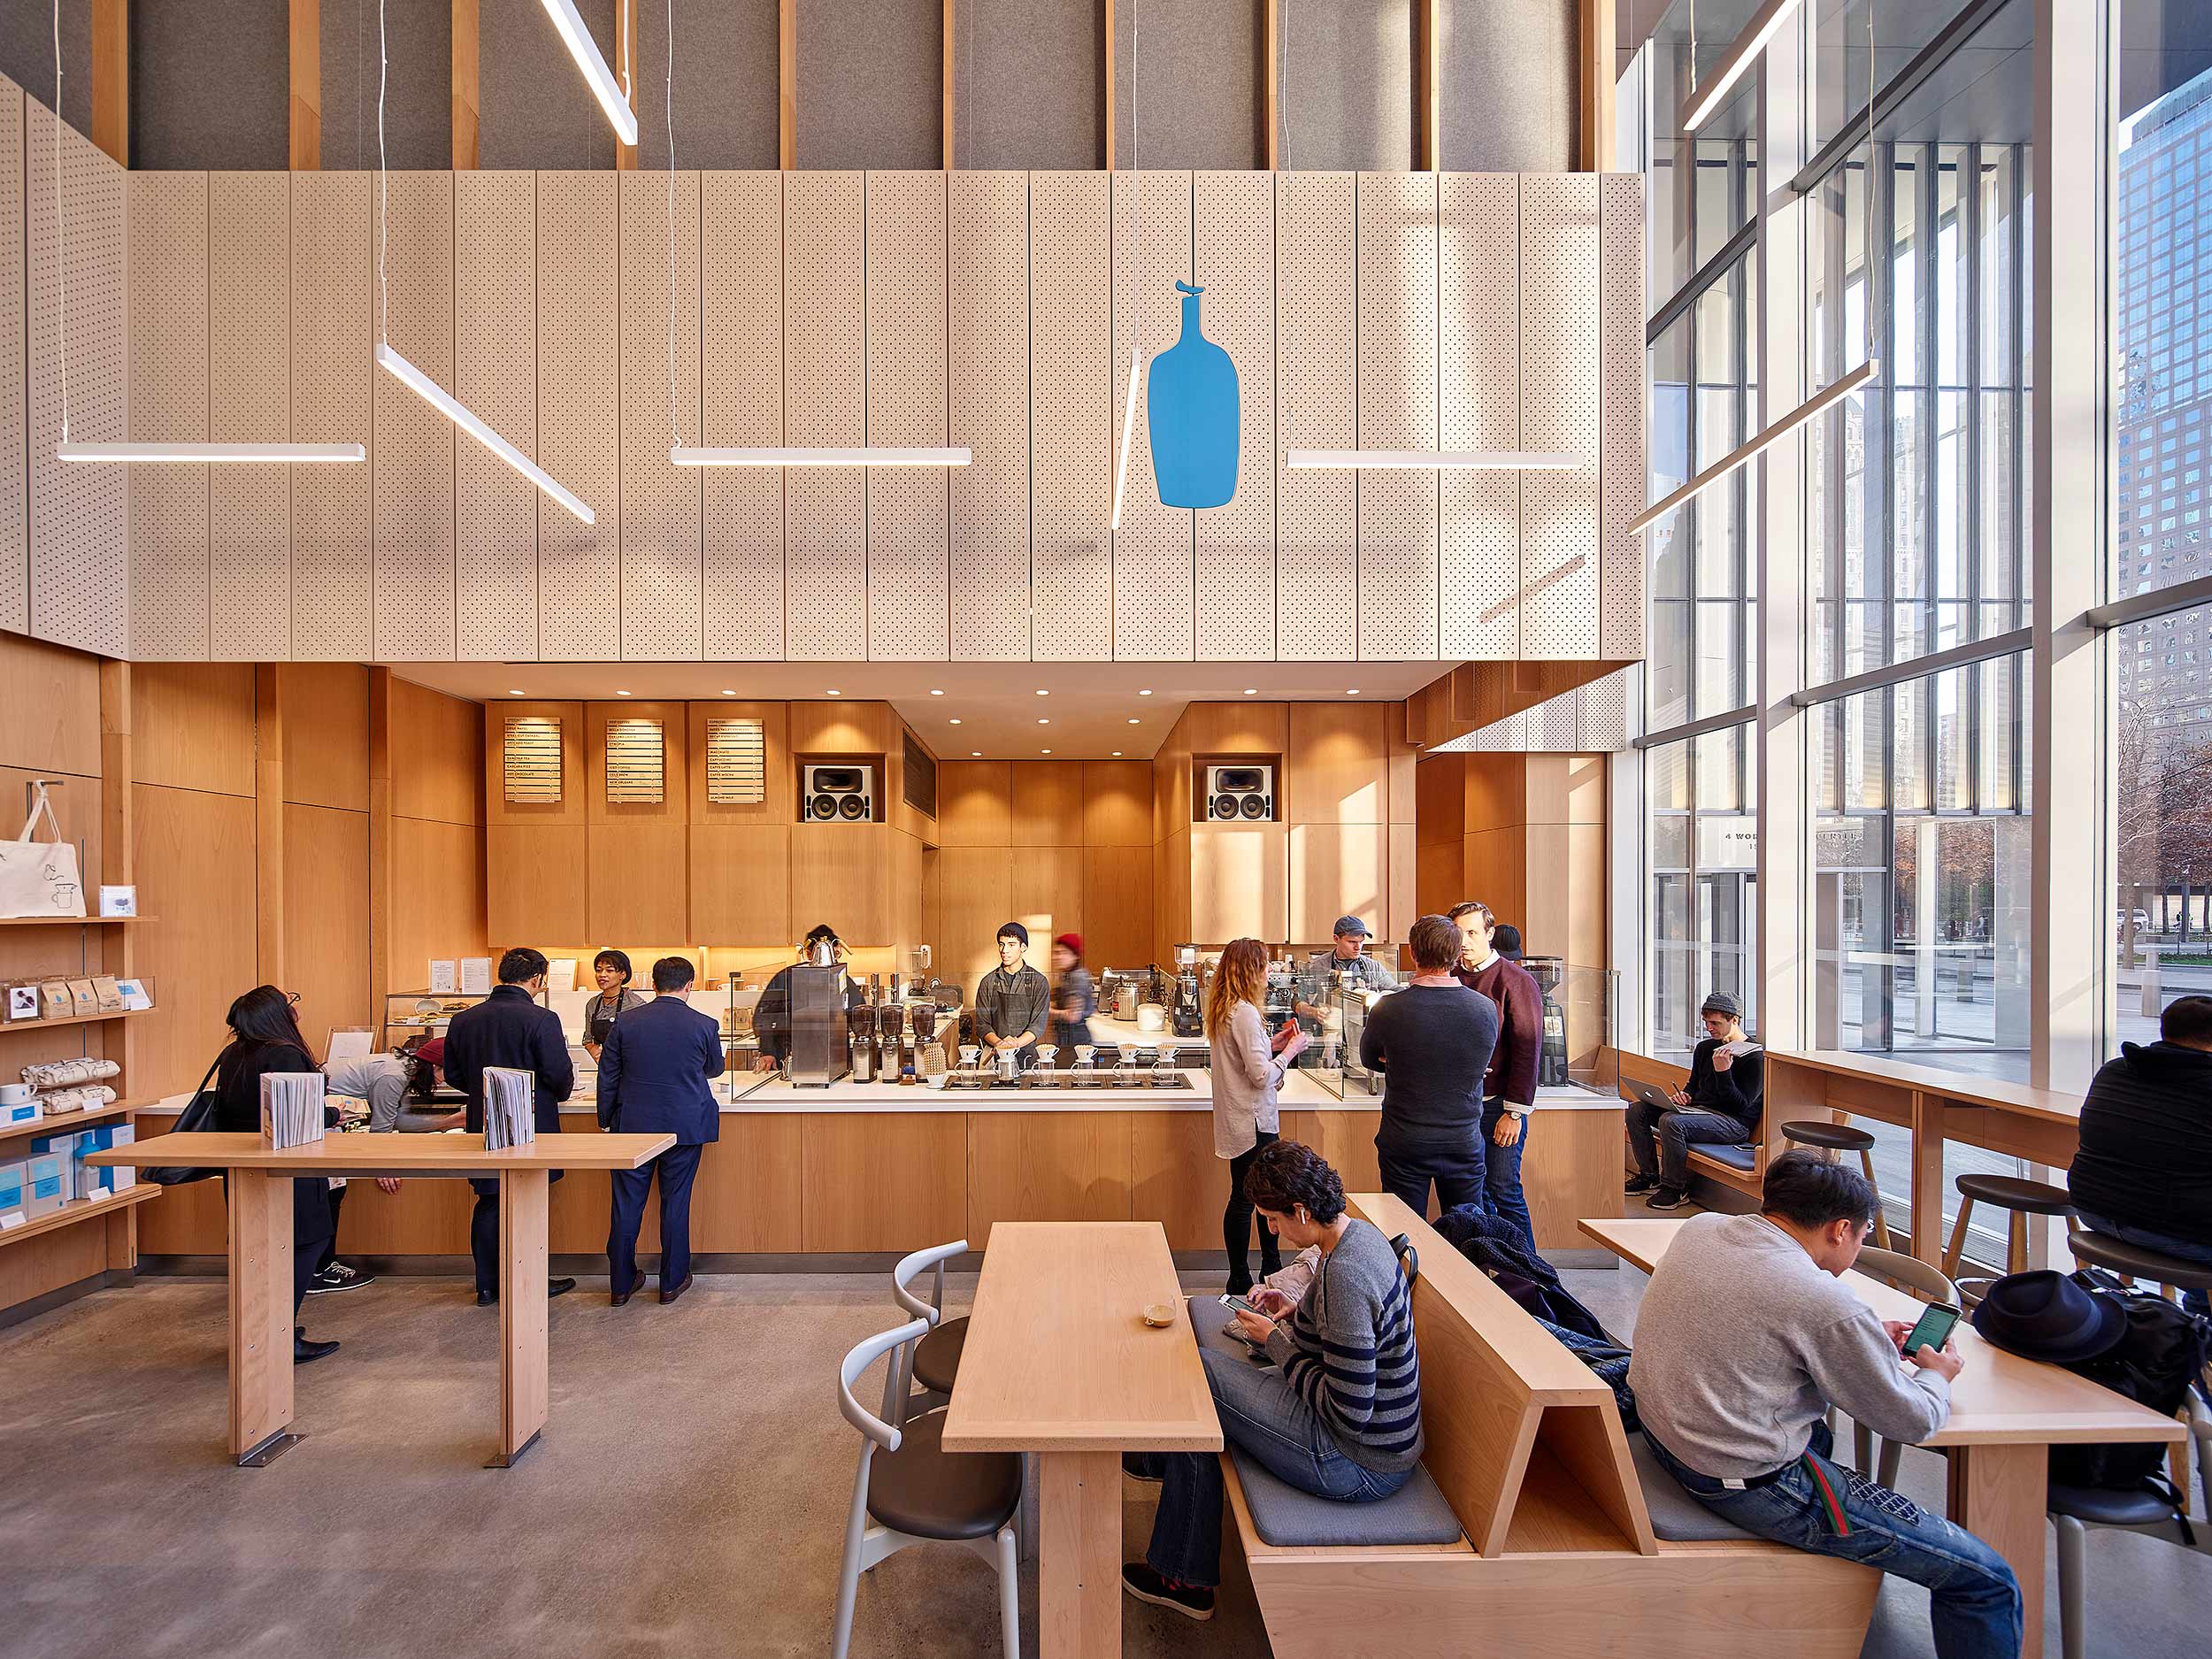  Blue Bottle Coffee, World Trade Center New York, NY Bohlin Cywinski Jackson See More in  Retail  